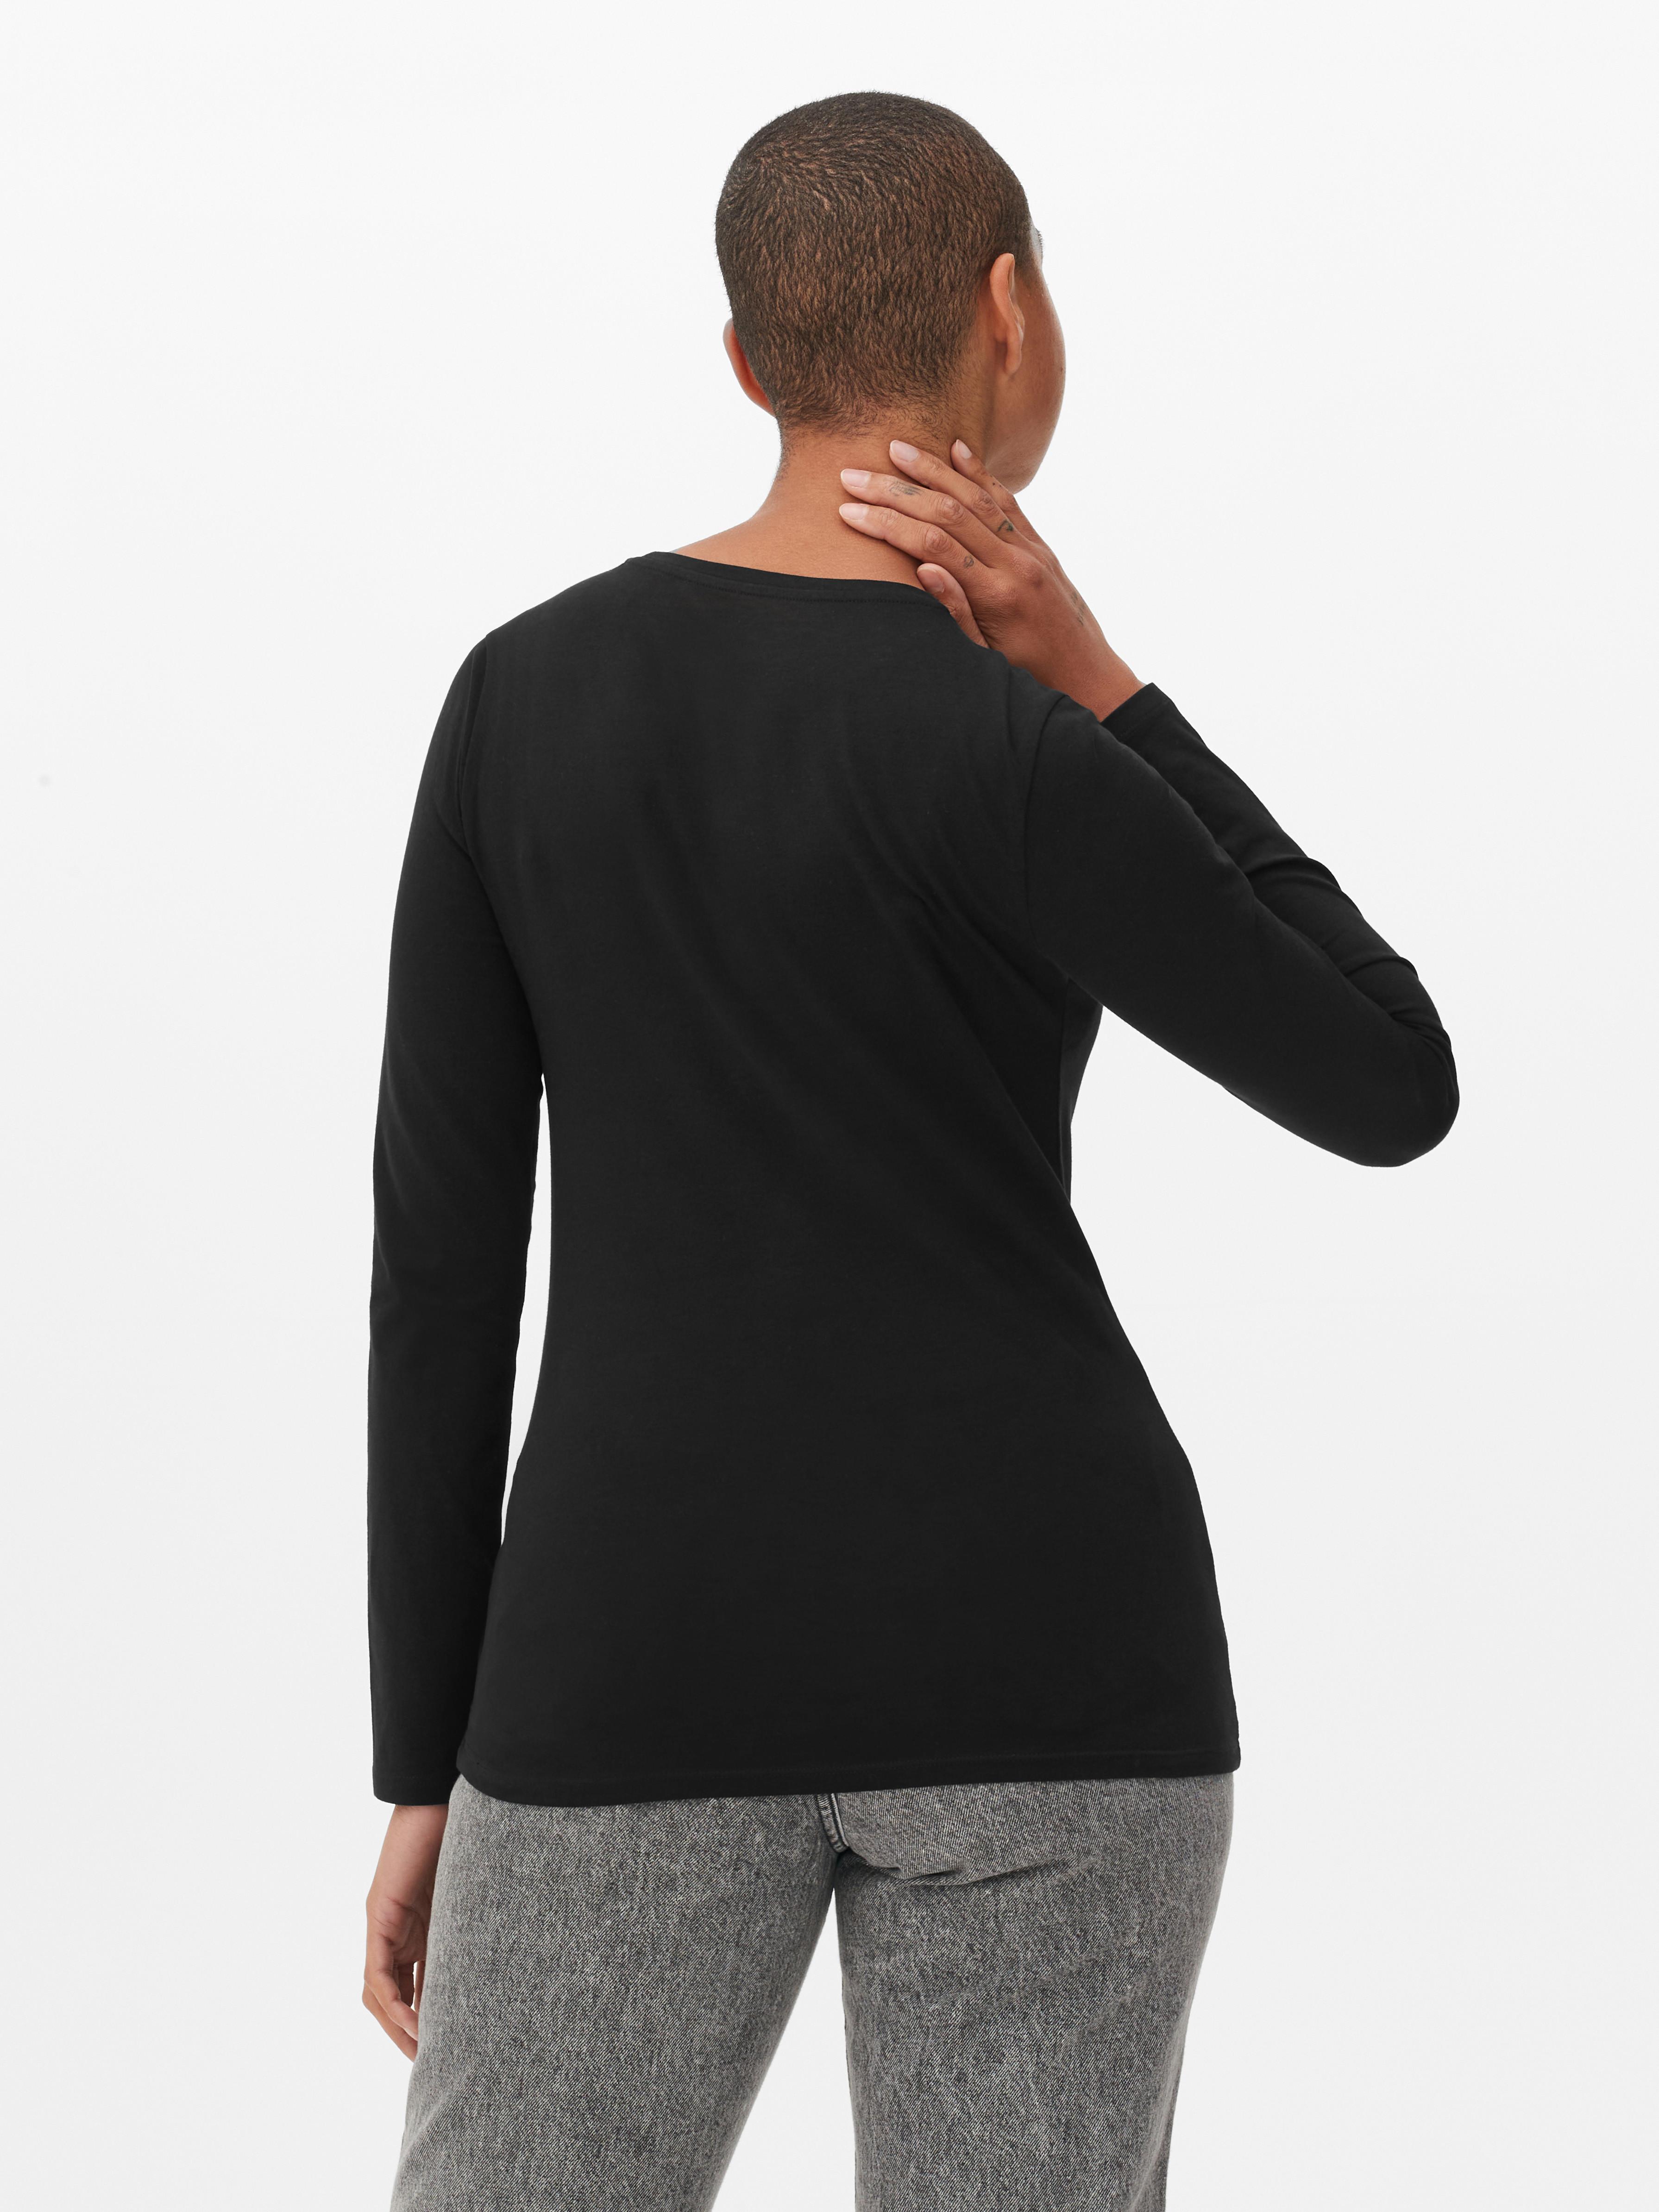 Minimalist Black Knitted Primark Thermal Tops For Women Winter O Neck Base  Shirt With Long Sleeves, Solid Tight Fitting Top For Streetwear From  Clothing3241, $28.14